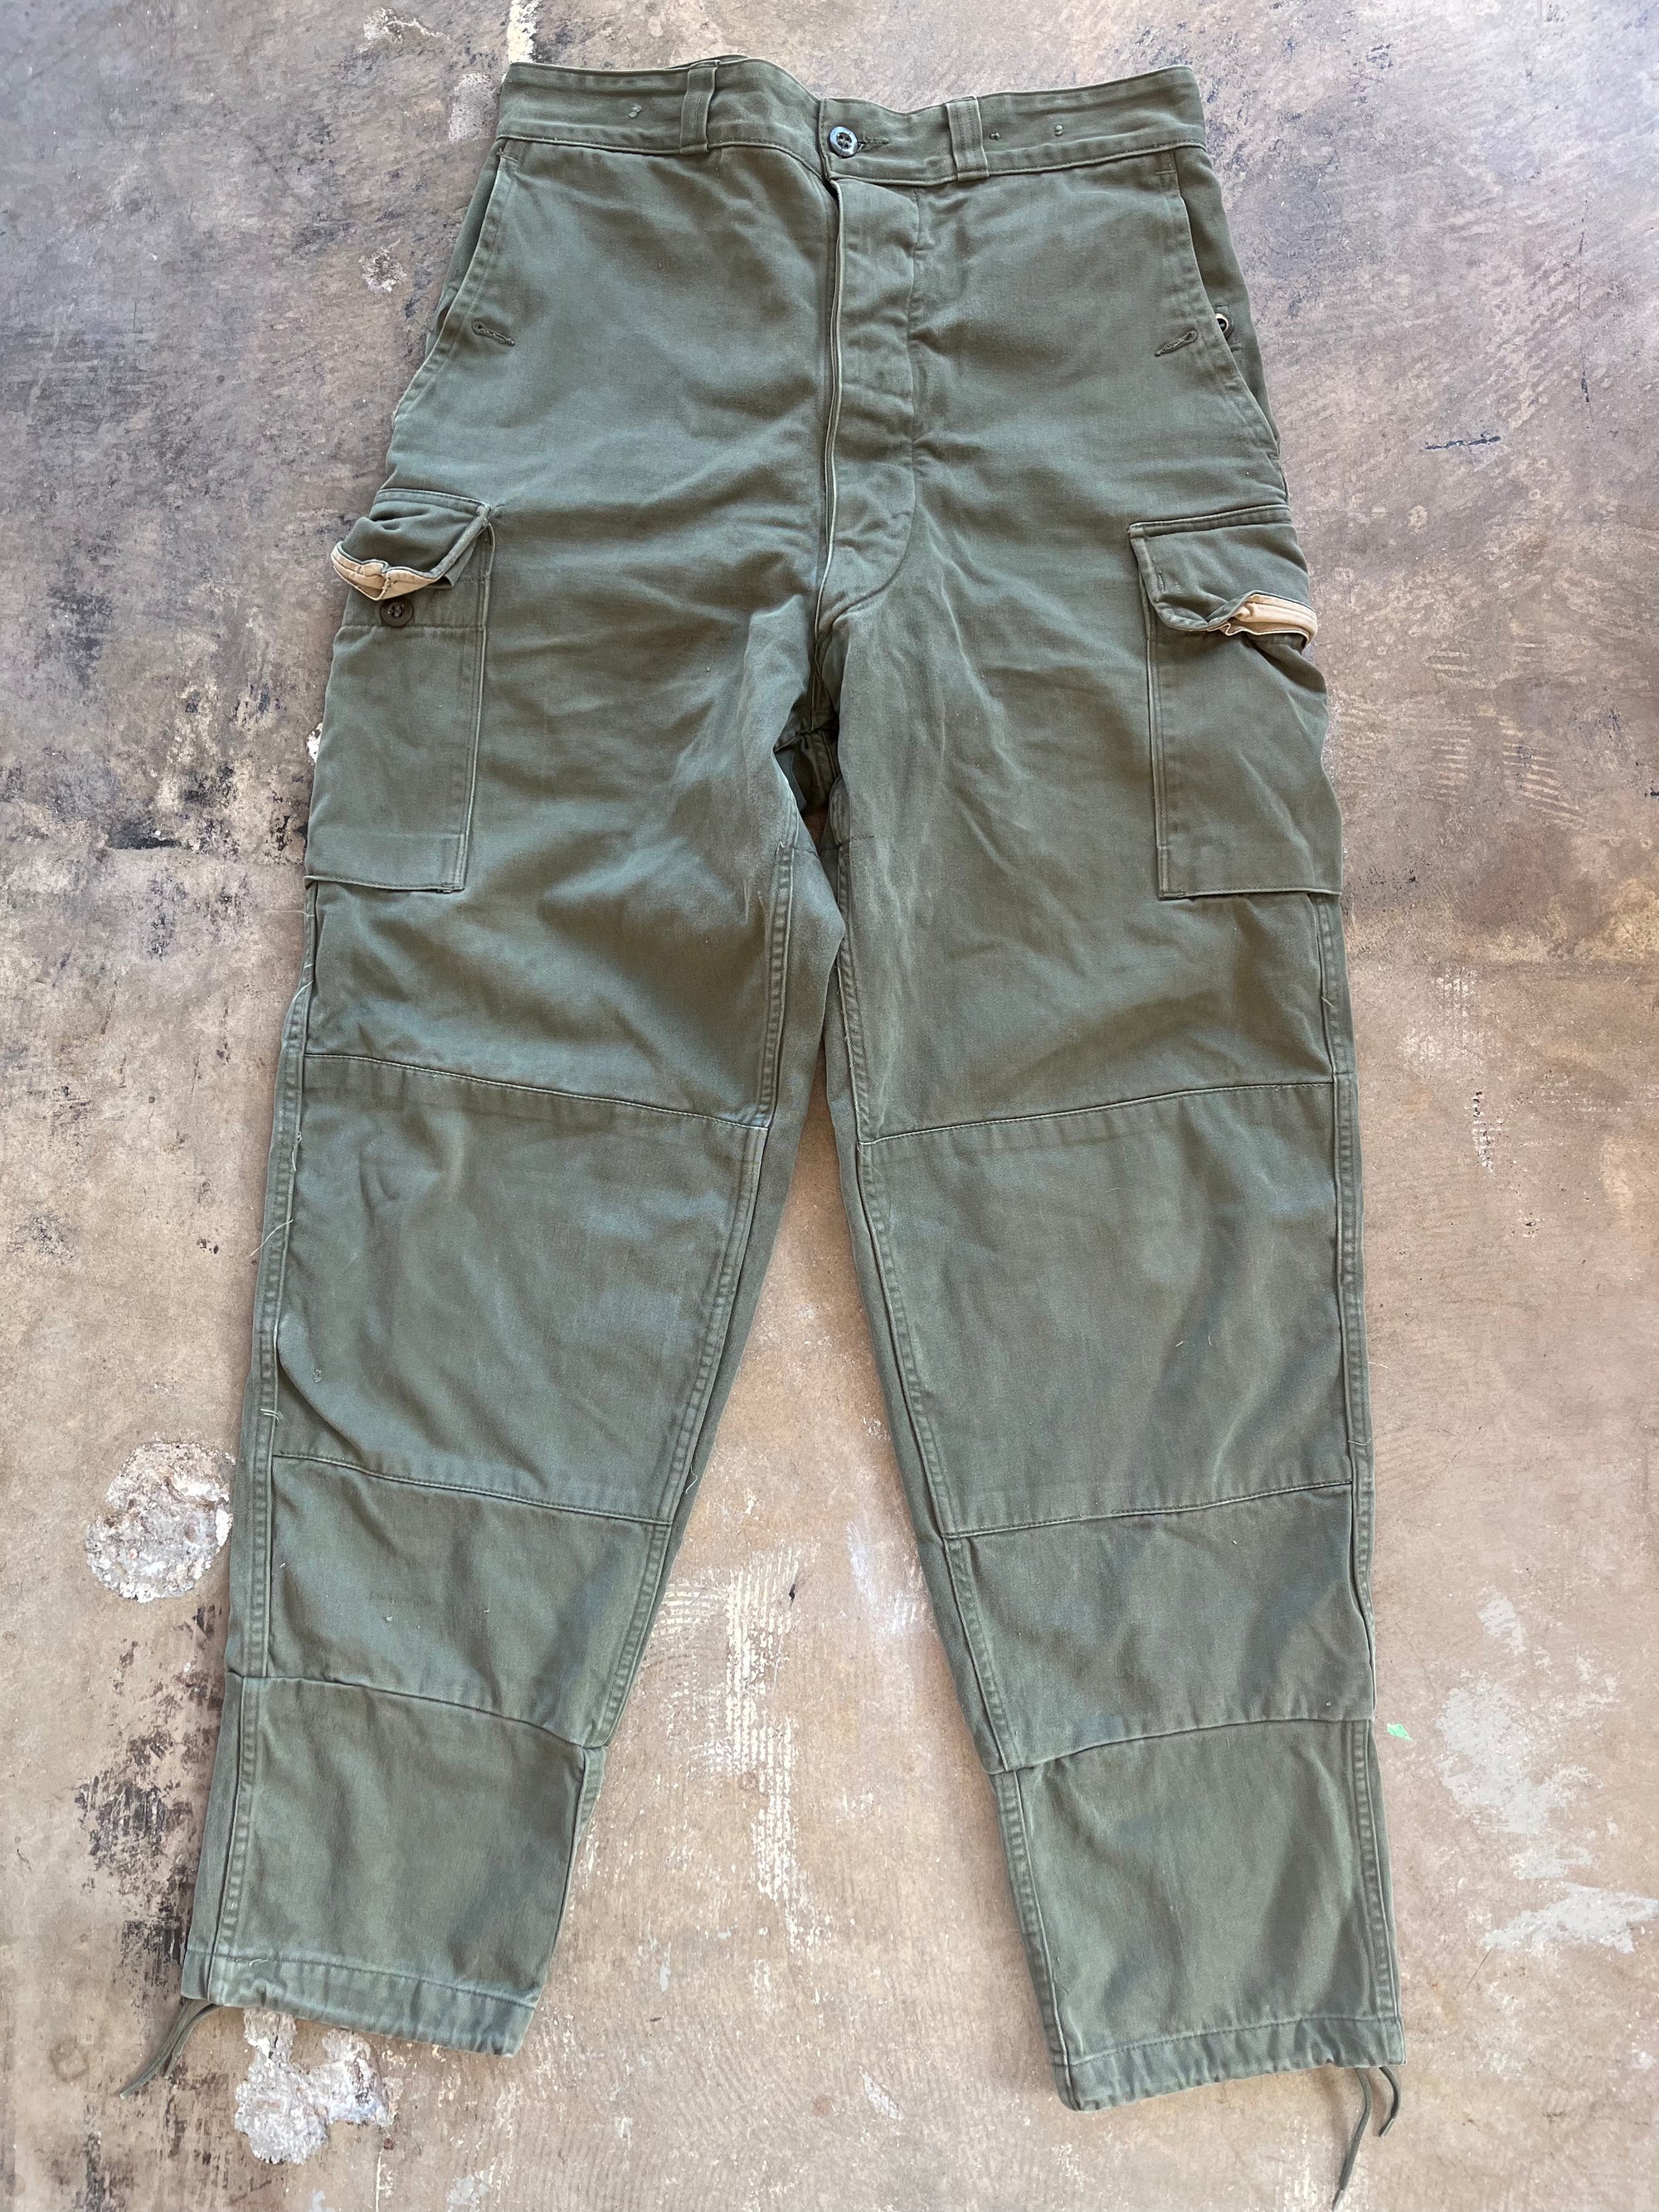 Green French Military Pants